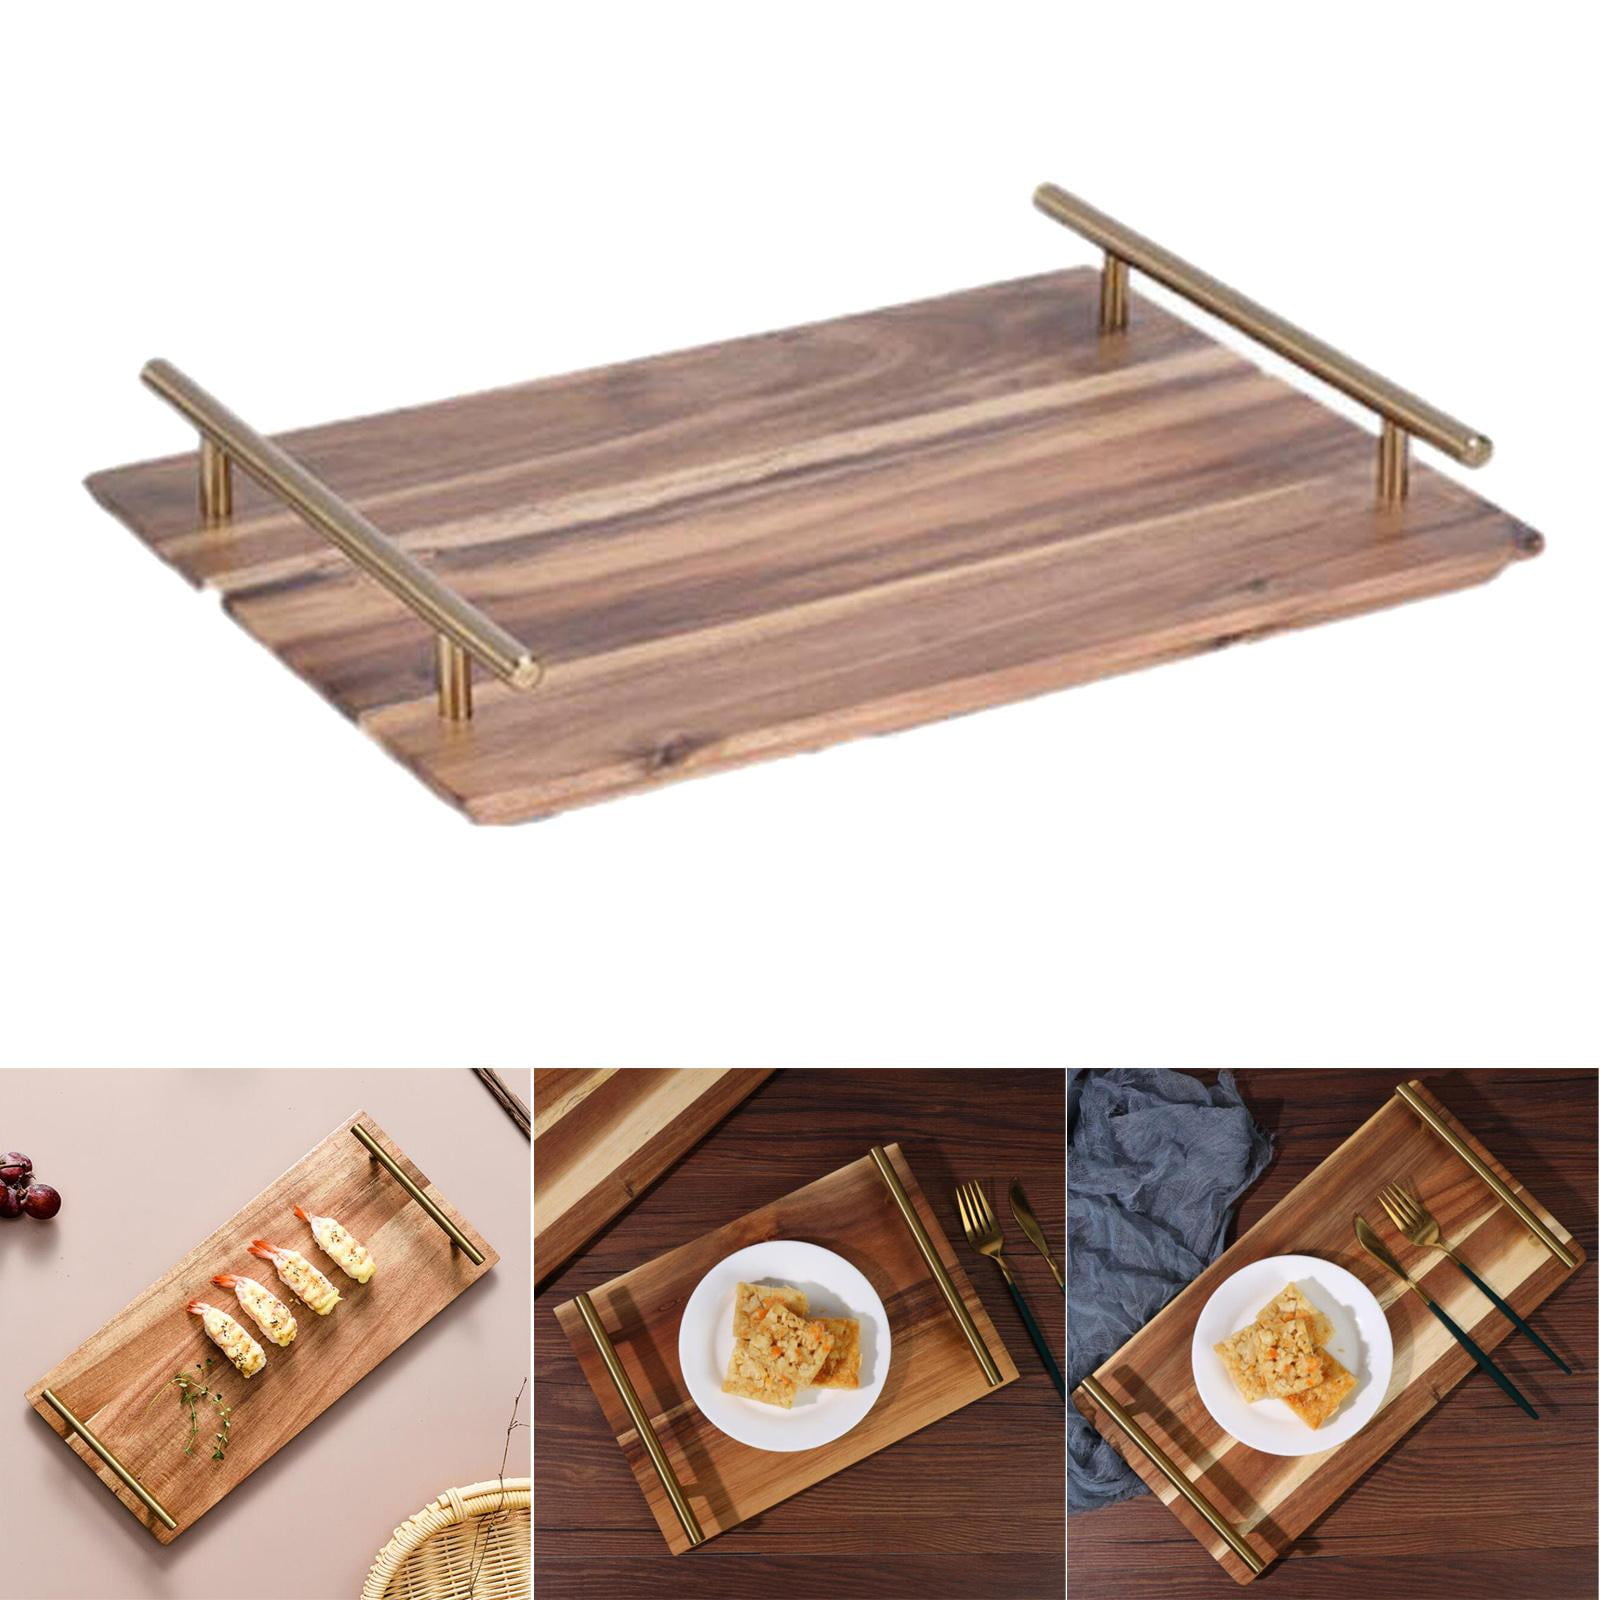 Details about   1Pcs Acacia Wood Serving Tray Square Rectangle Breakfast Sushi Snack Bread Desse 